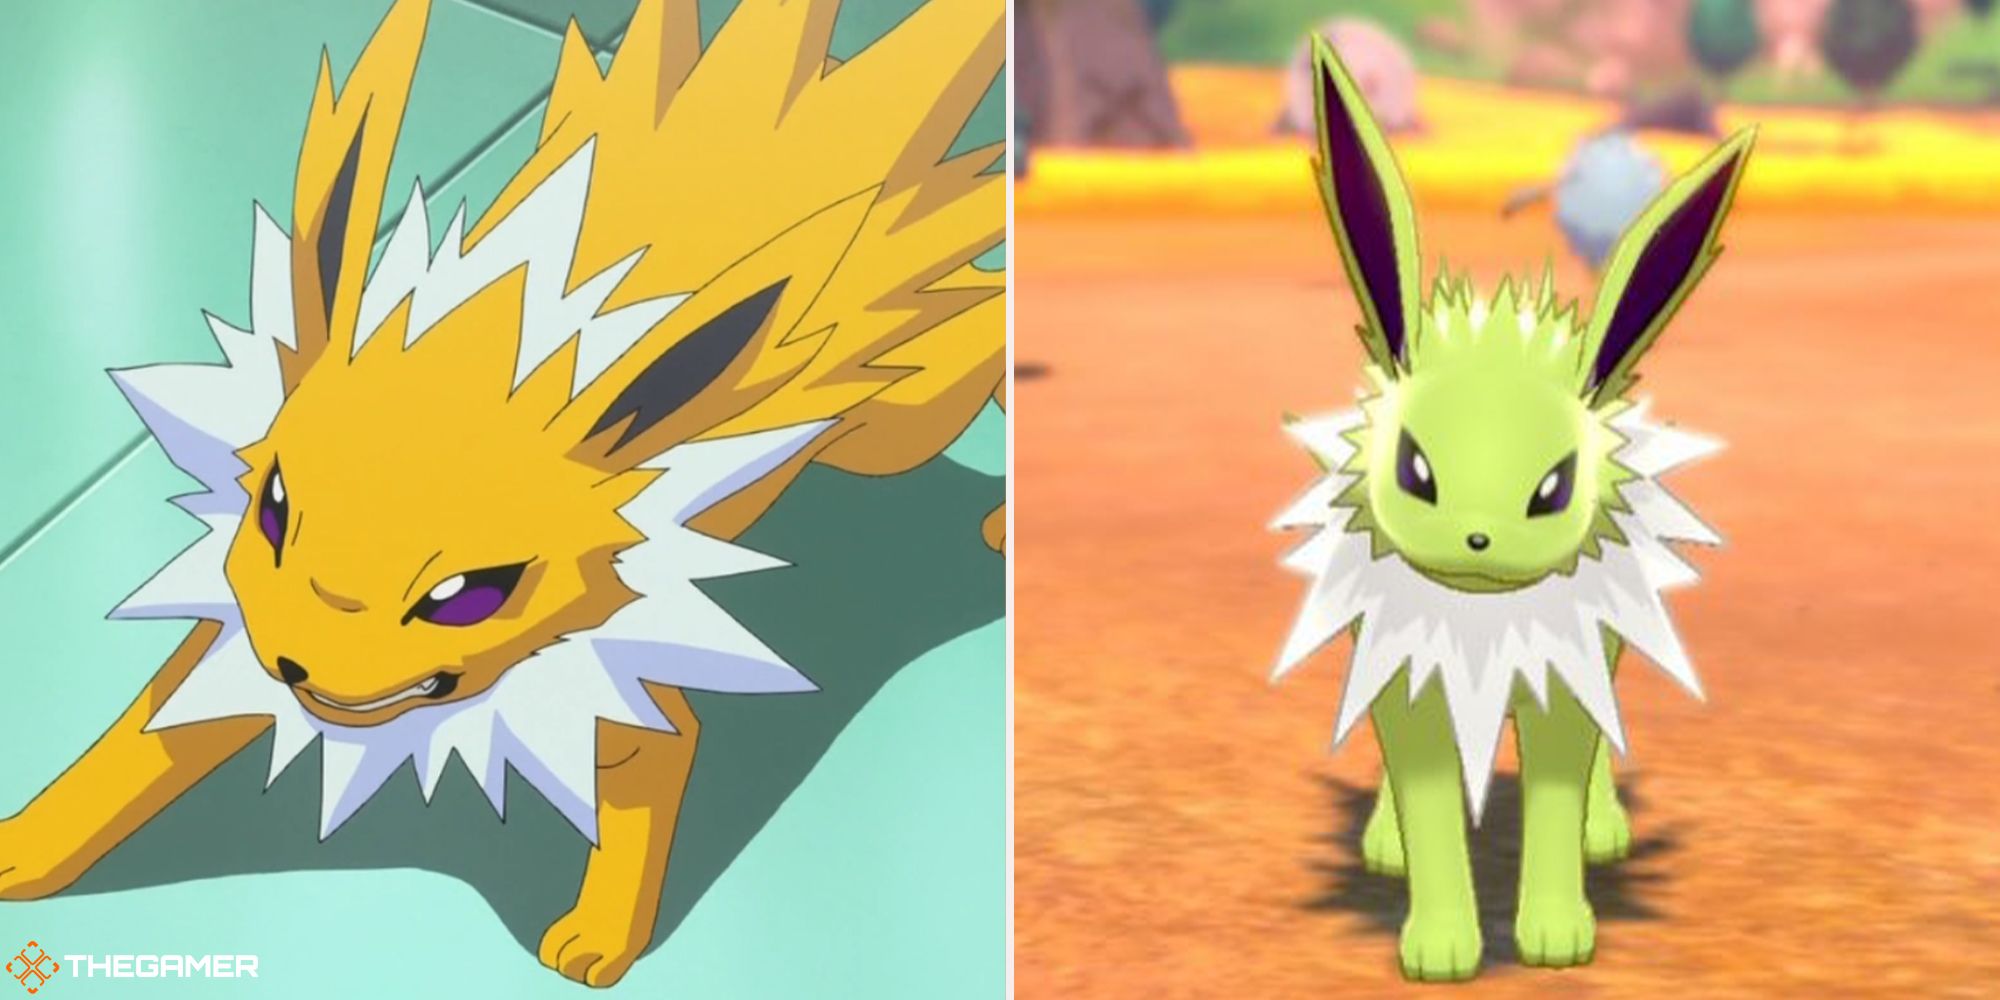 A split image of Jolteon in the Pokemon anime on the left and shiny Jolteon on the right.